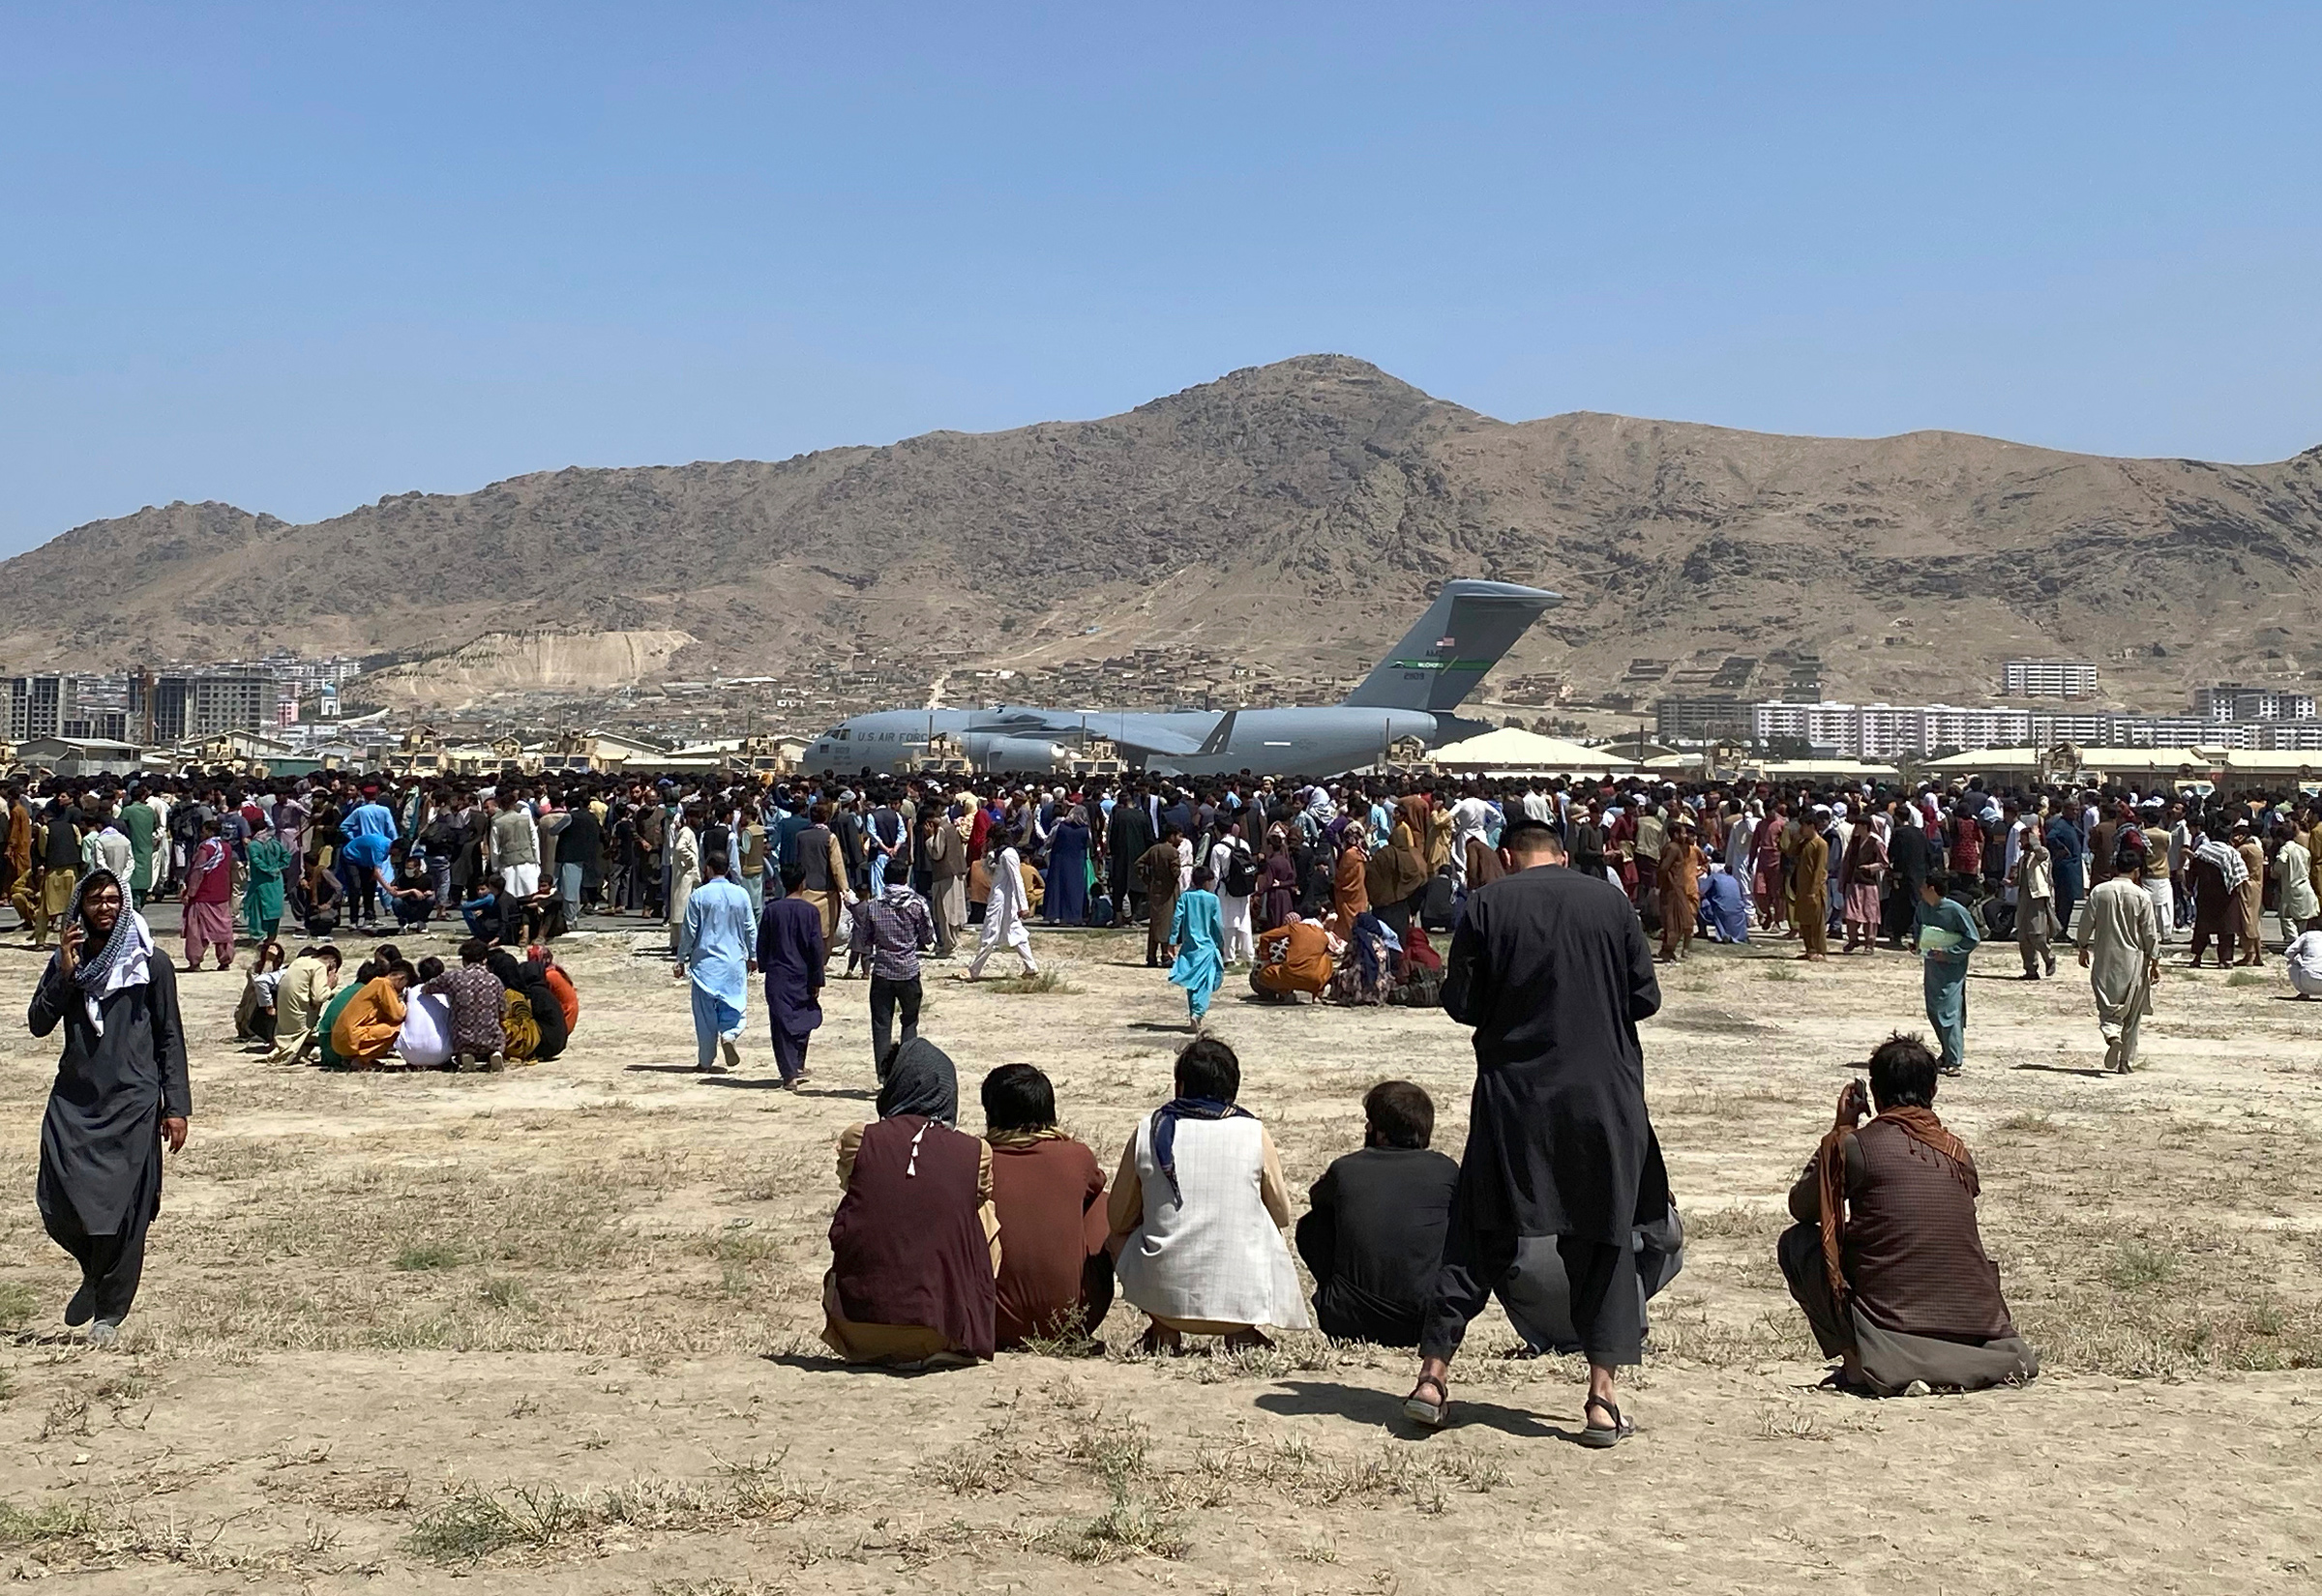 Hundreds of people gather near a U.S. Air Force C-17 transport plane at a perimeter at the international airport in Kabul on Monday, Aug. 16.